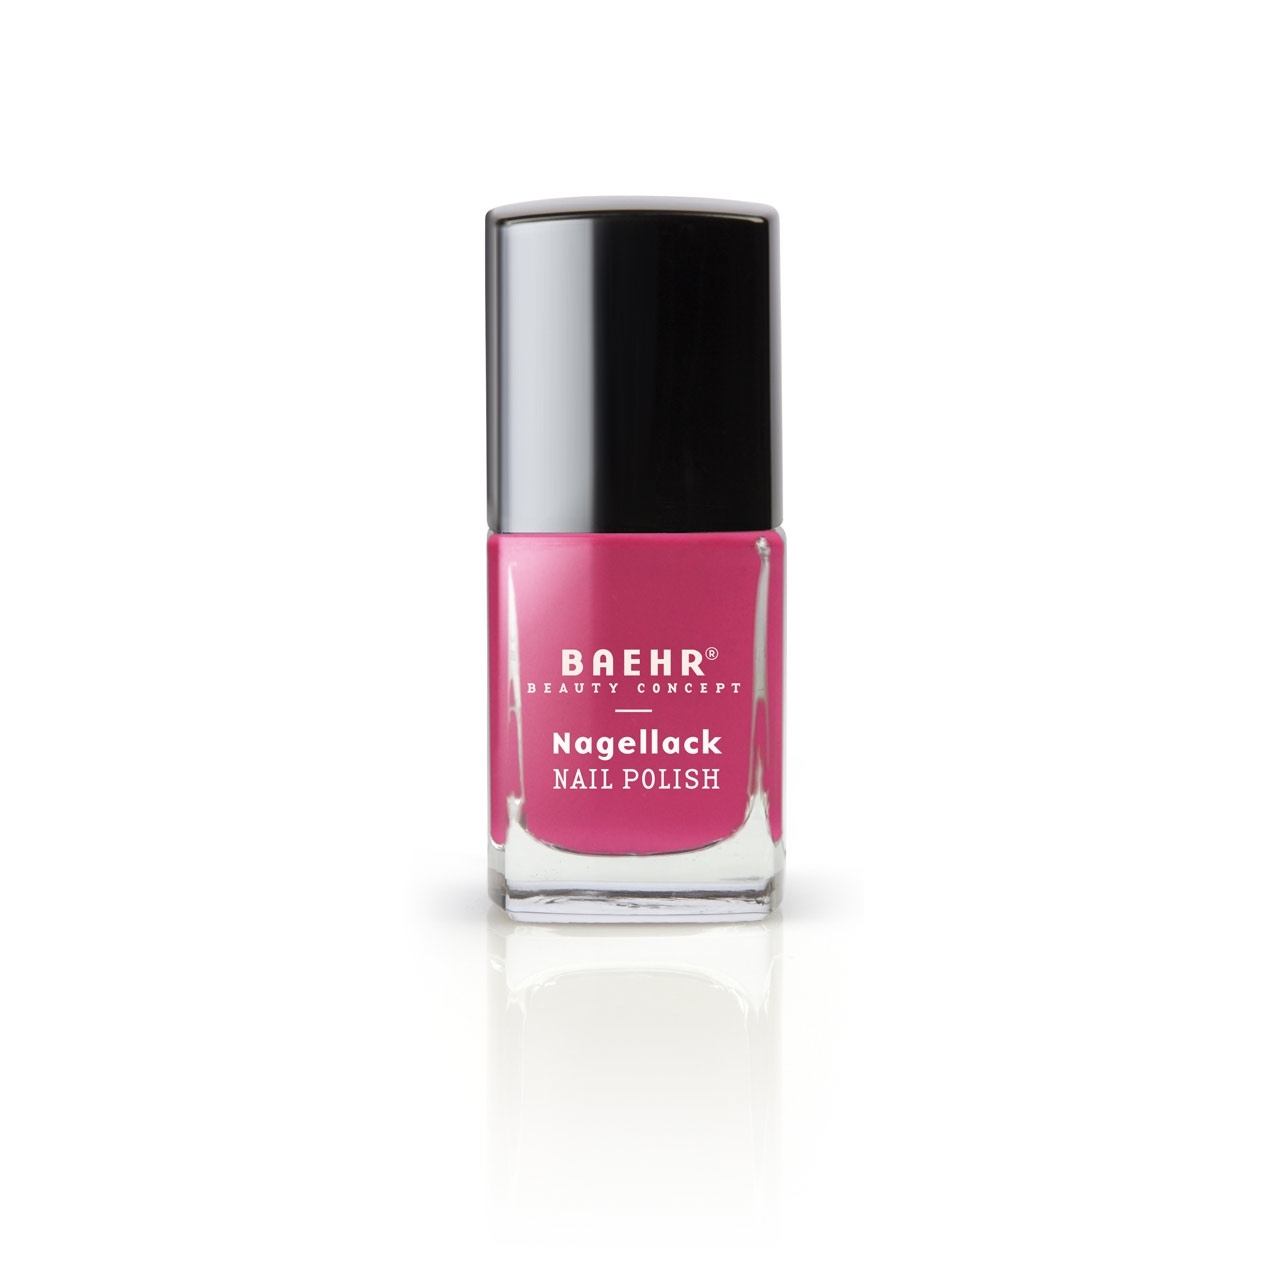 BAEHR BEAUTY CONCEPT - NAILS Nagellack lady like 11 ml